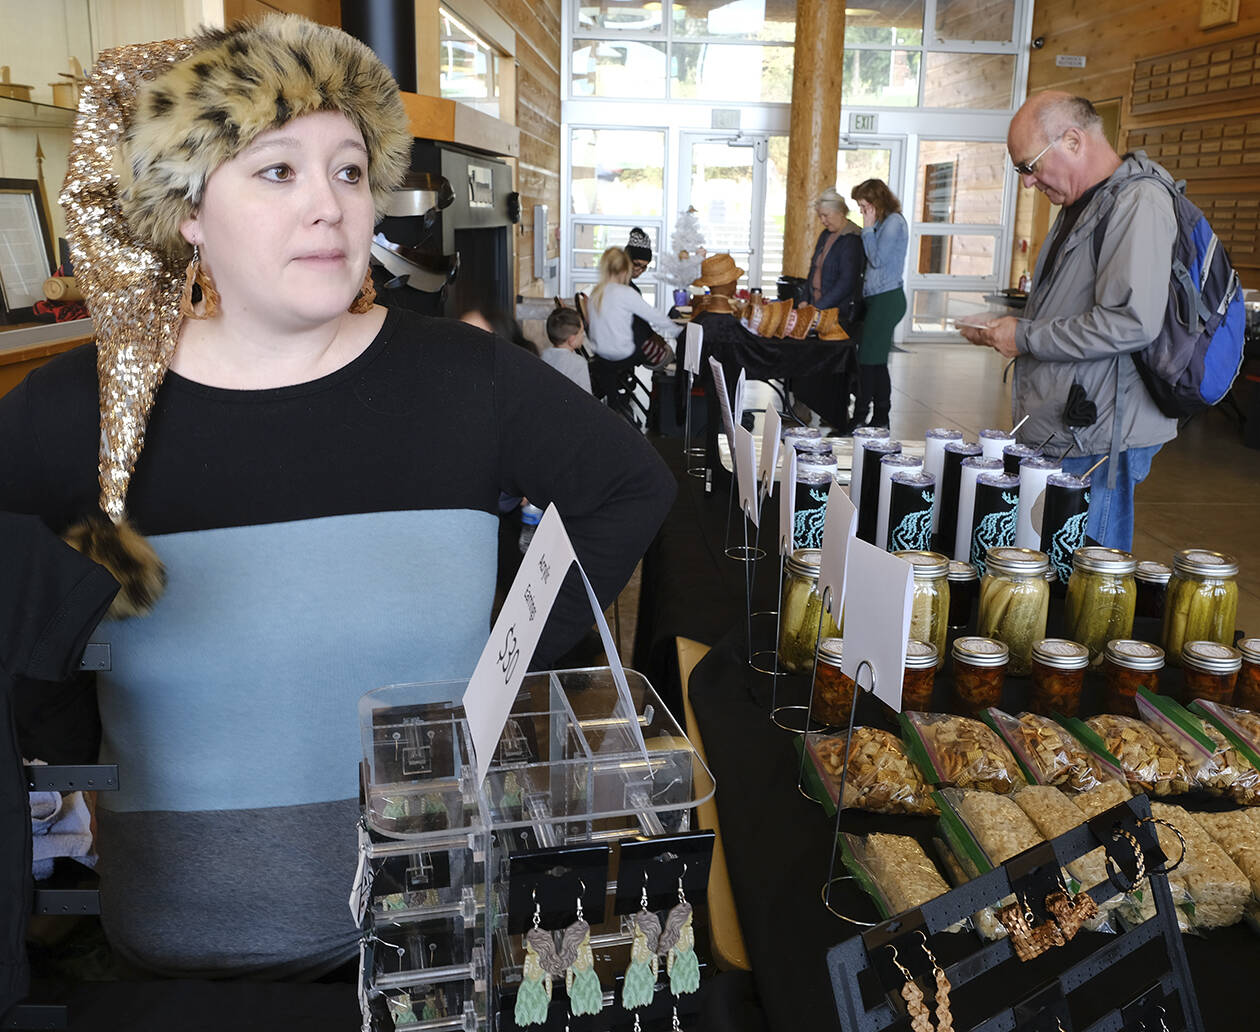 Those who came to the craft fair in Suquamish recently were able to buy various drinks.